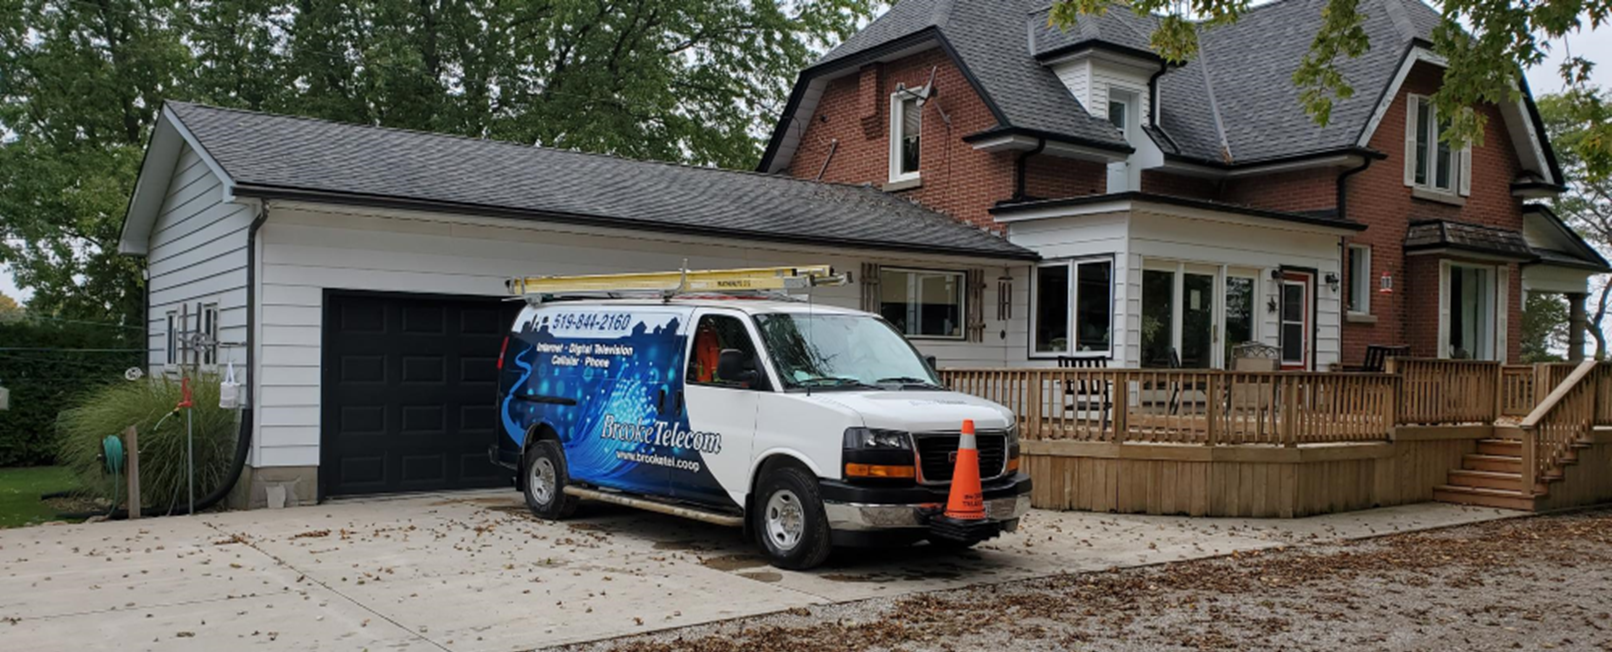 SWIFT Announces New High-Speed Broadband Connections in Lambton County